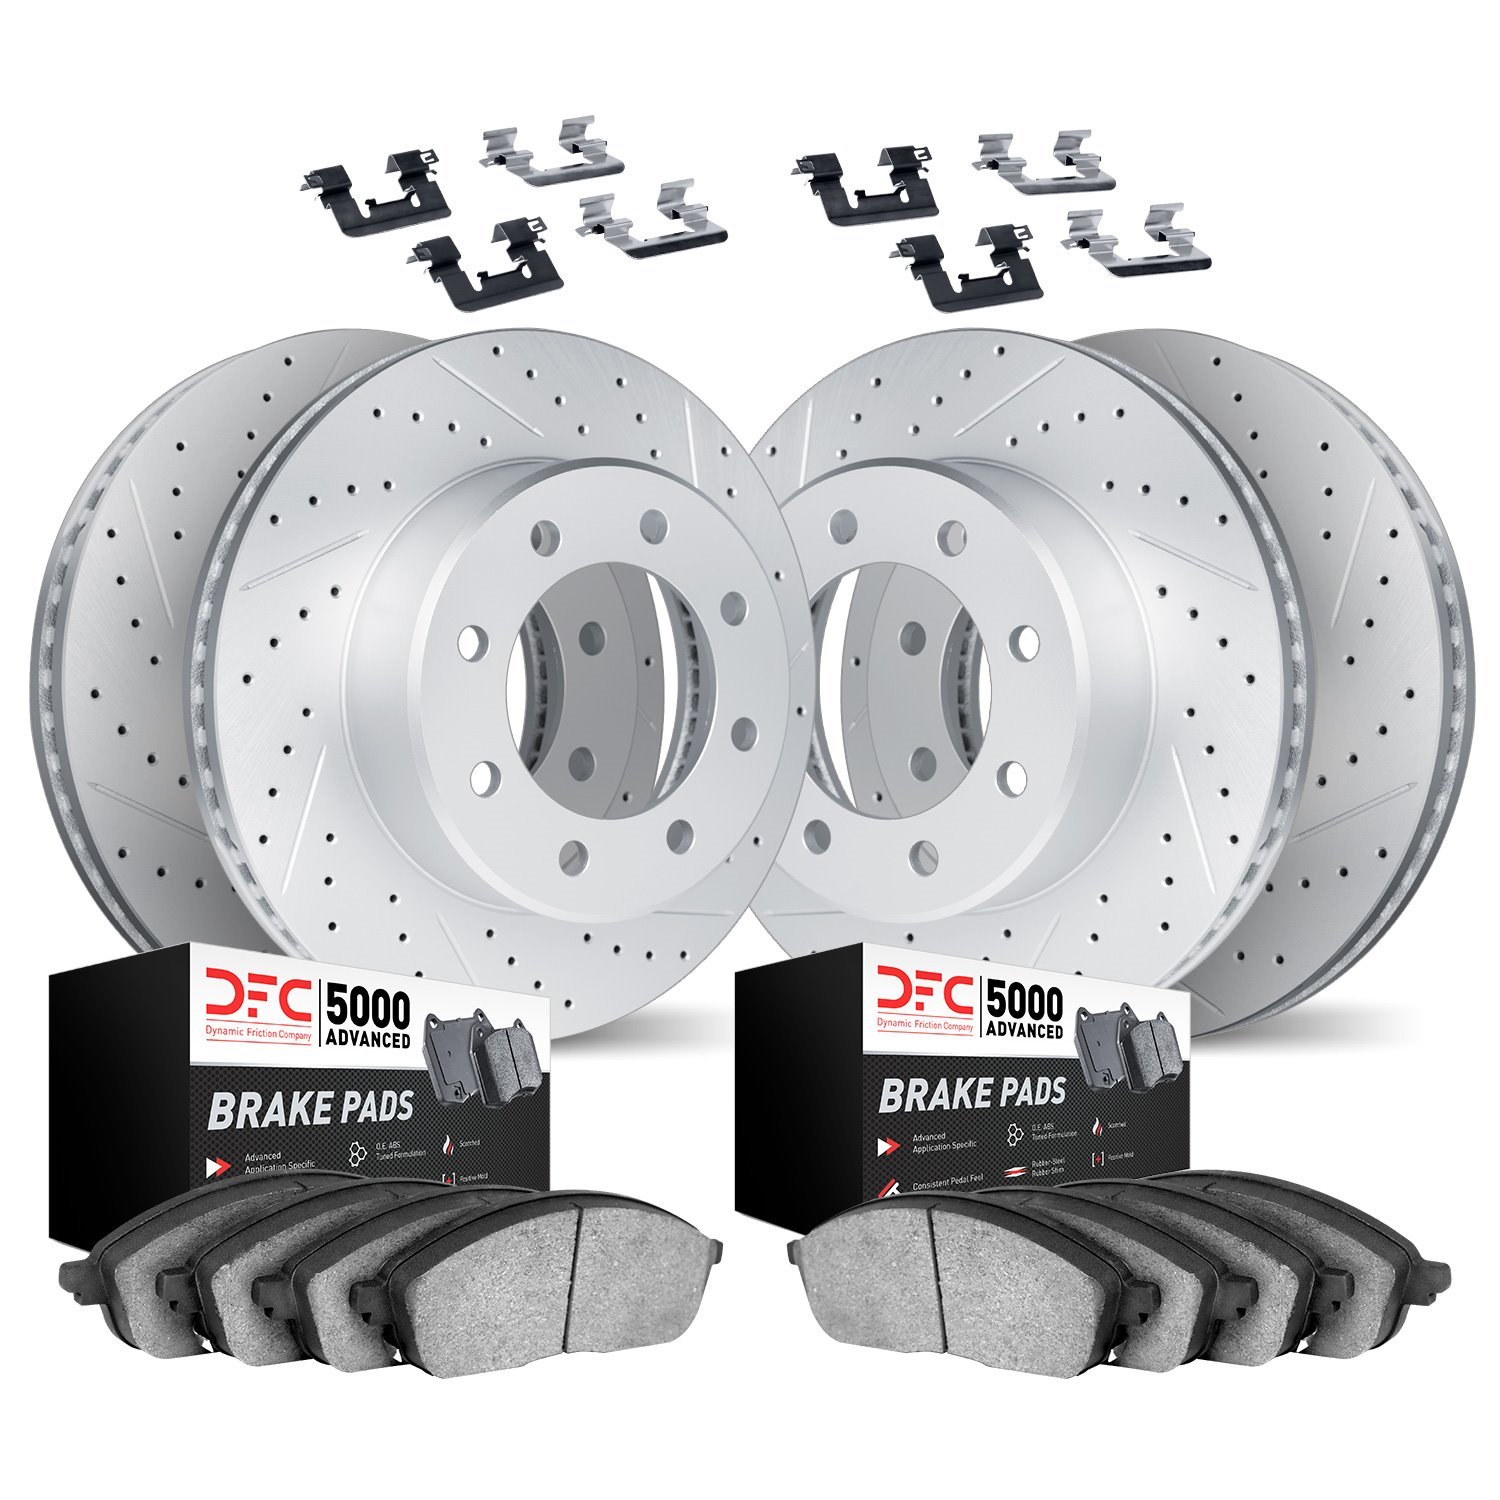 2514-48025 Geoperformance Drilled/Slotted Rotors w/5000 Advanced Brake Pads Kit & Hardware, 2003-2008 GM, Position: Front and Re